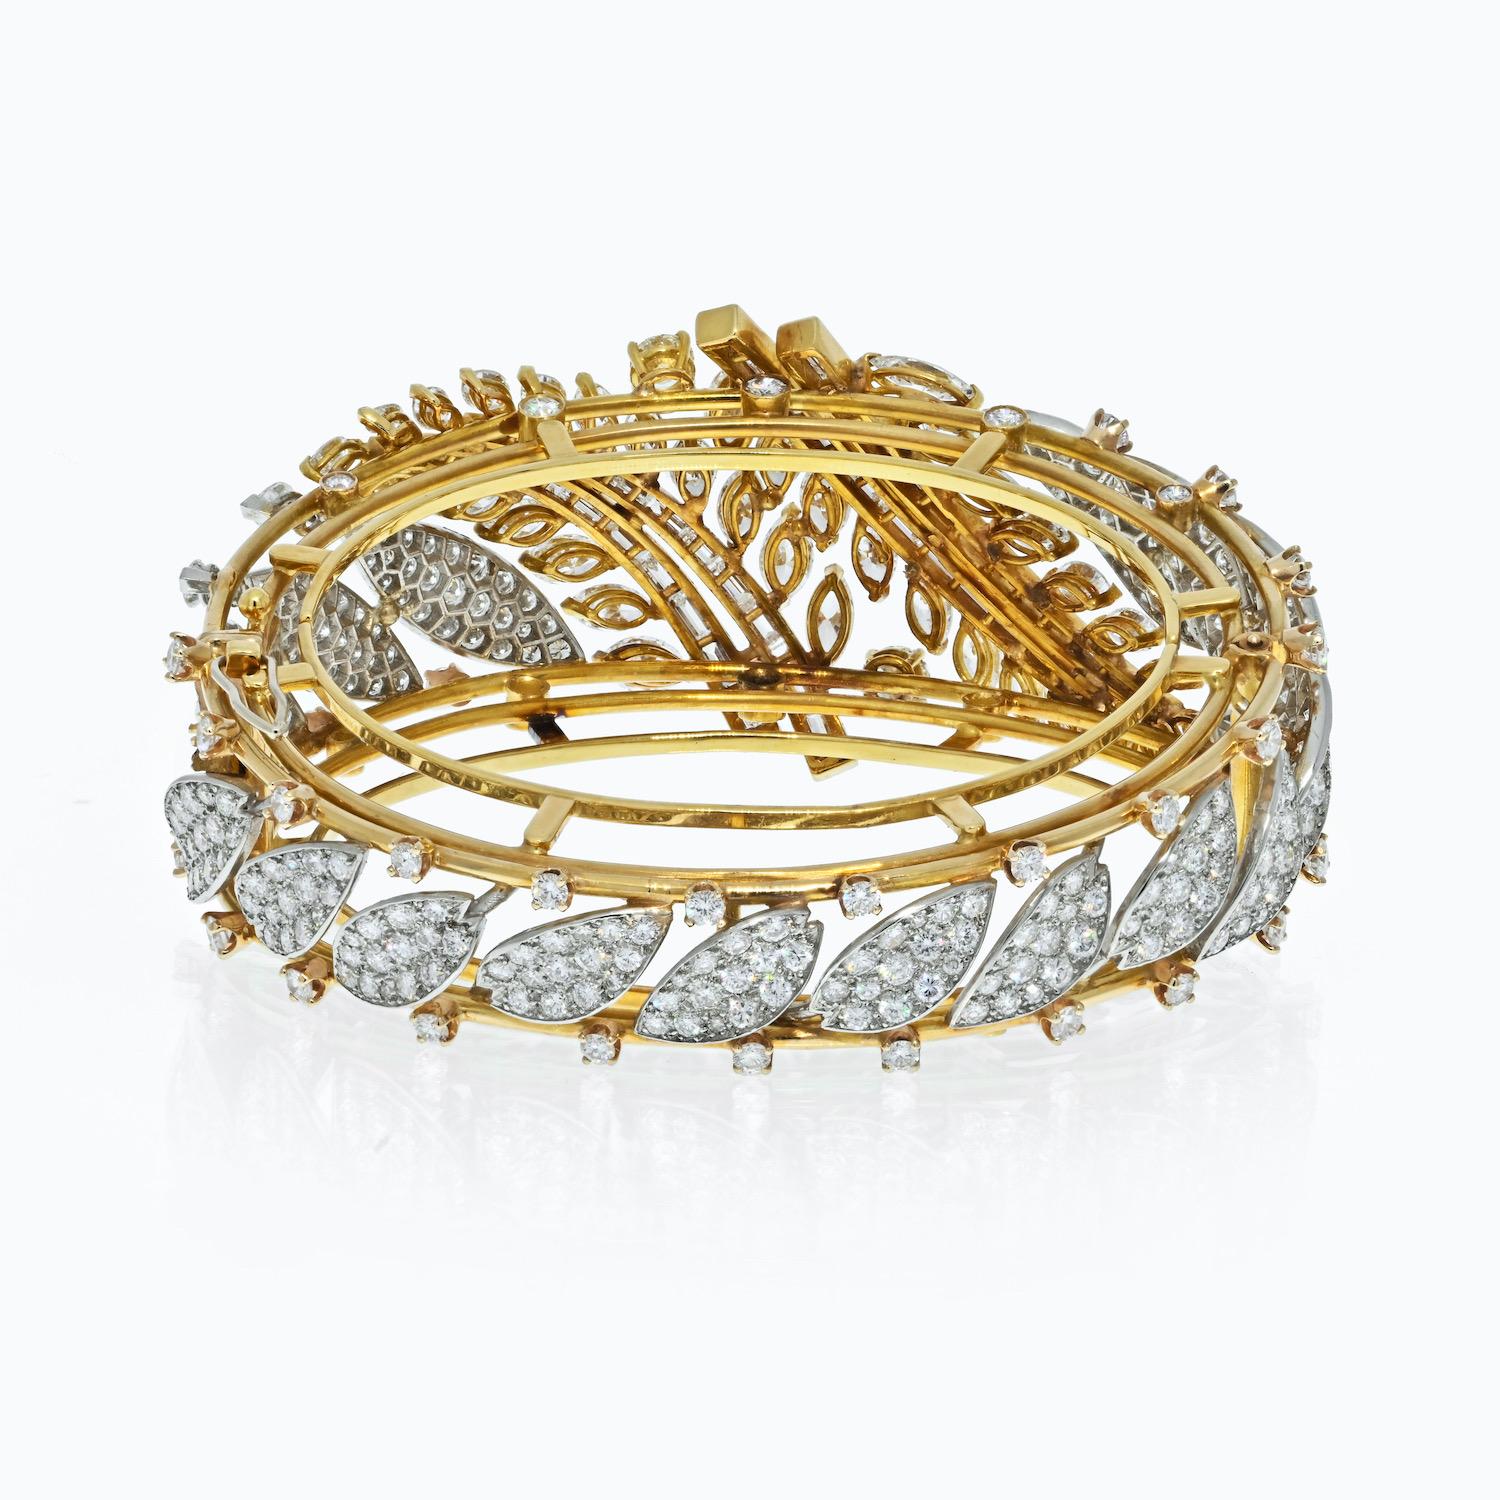 This diamond bangle bracelet is made to dazzle and will captivate you with its artful design. The bracelet is lavished with 27.50cttw of glorious diamonds, sparkling brilliantly from a band crafted in 18K Gold and Platinum. Notice how the